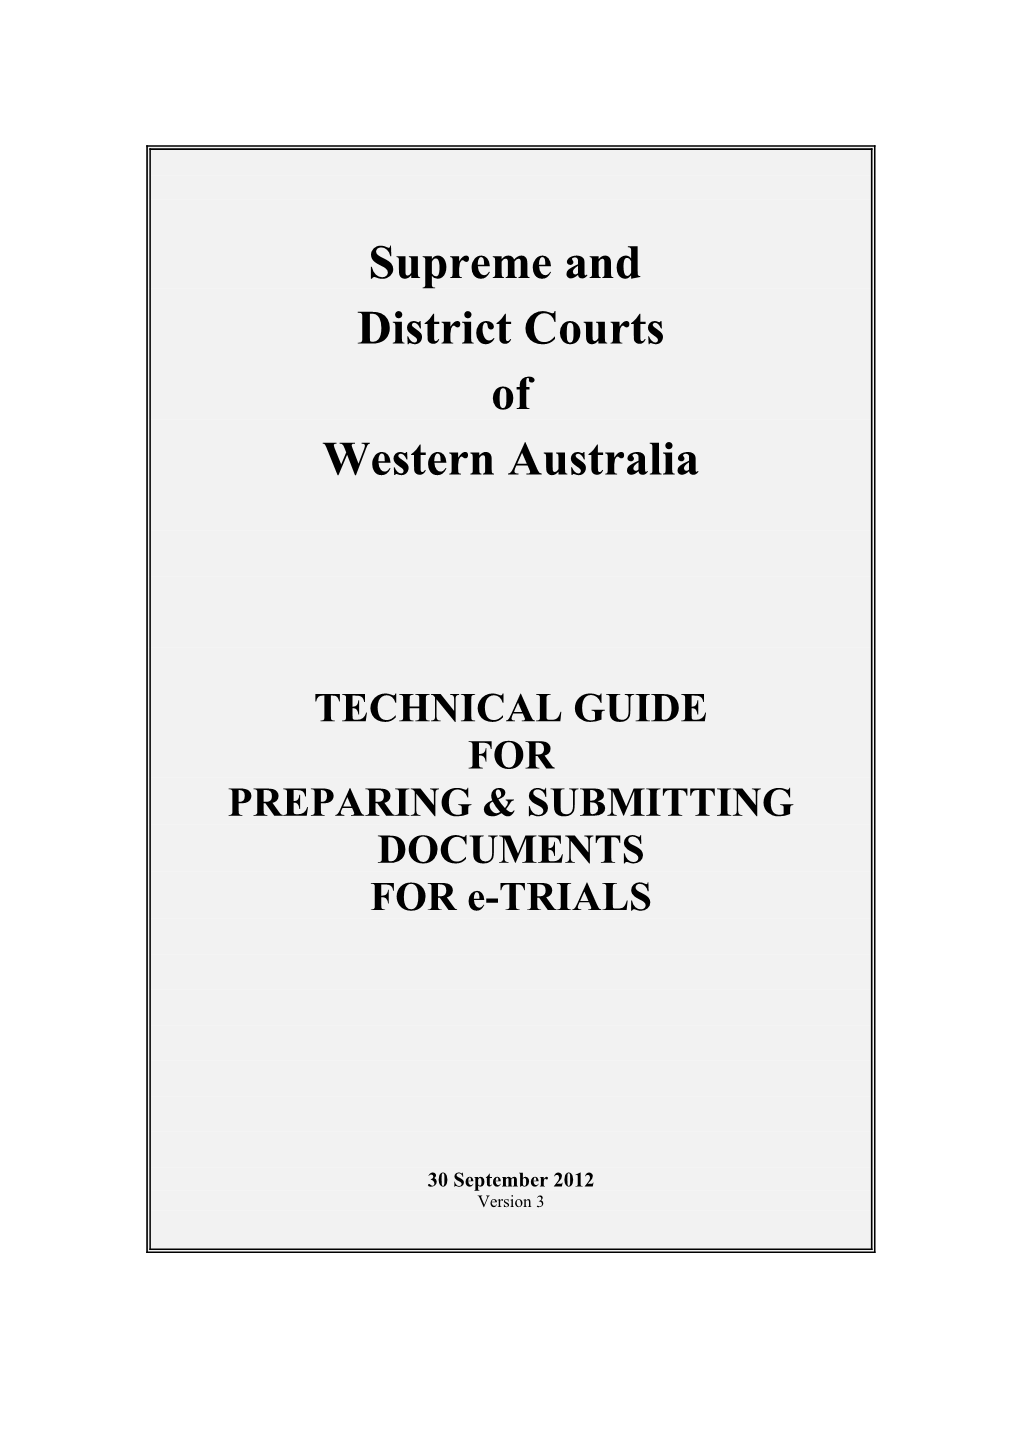 Supreme and District Courtselectronic Trial Book Guidelines